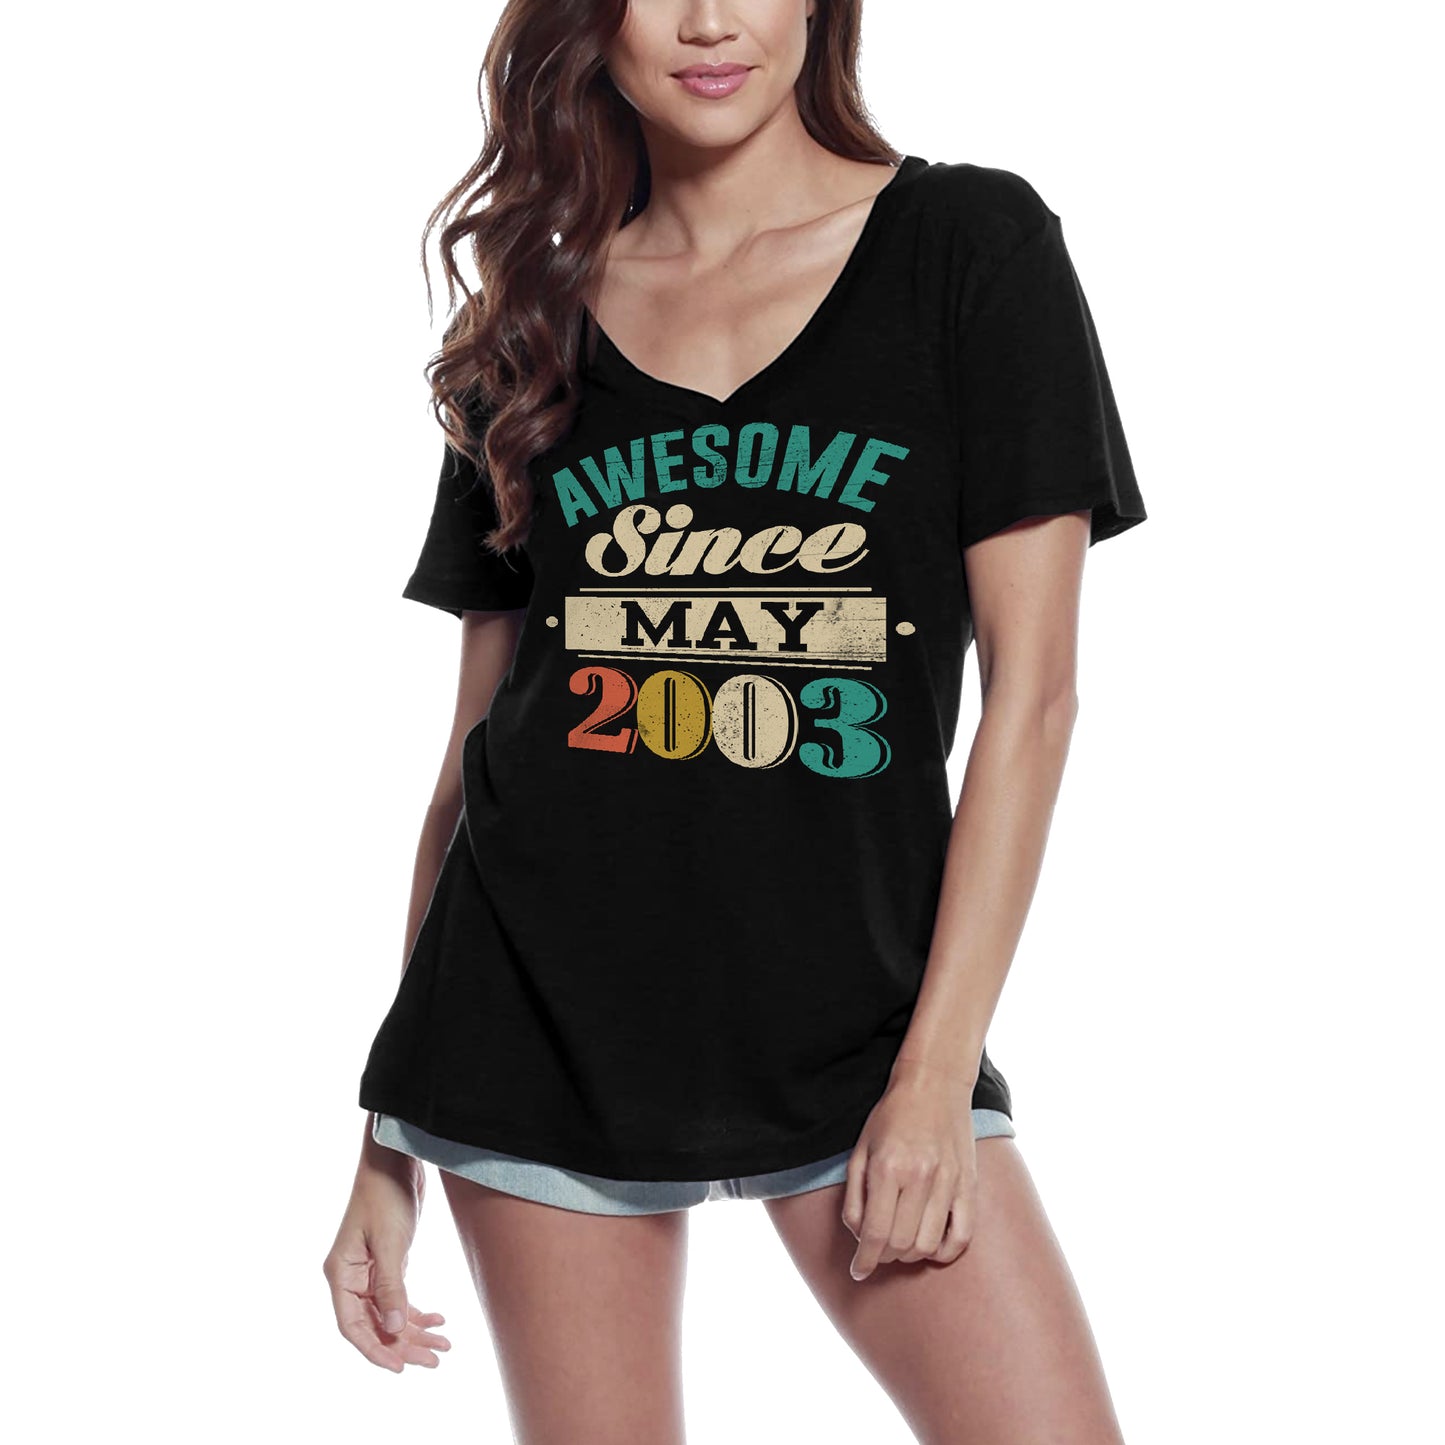 ULTRABASIC Women's Vintage T-Shirt Awesome Since May 2003 - Gift for 17th Birthday Tee Shirt